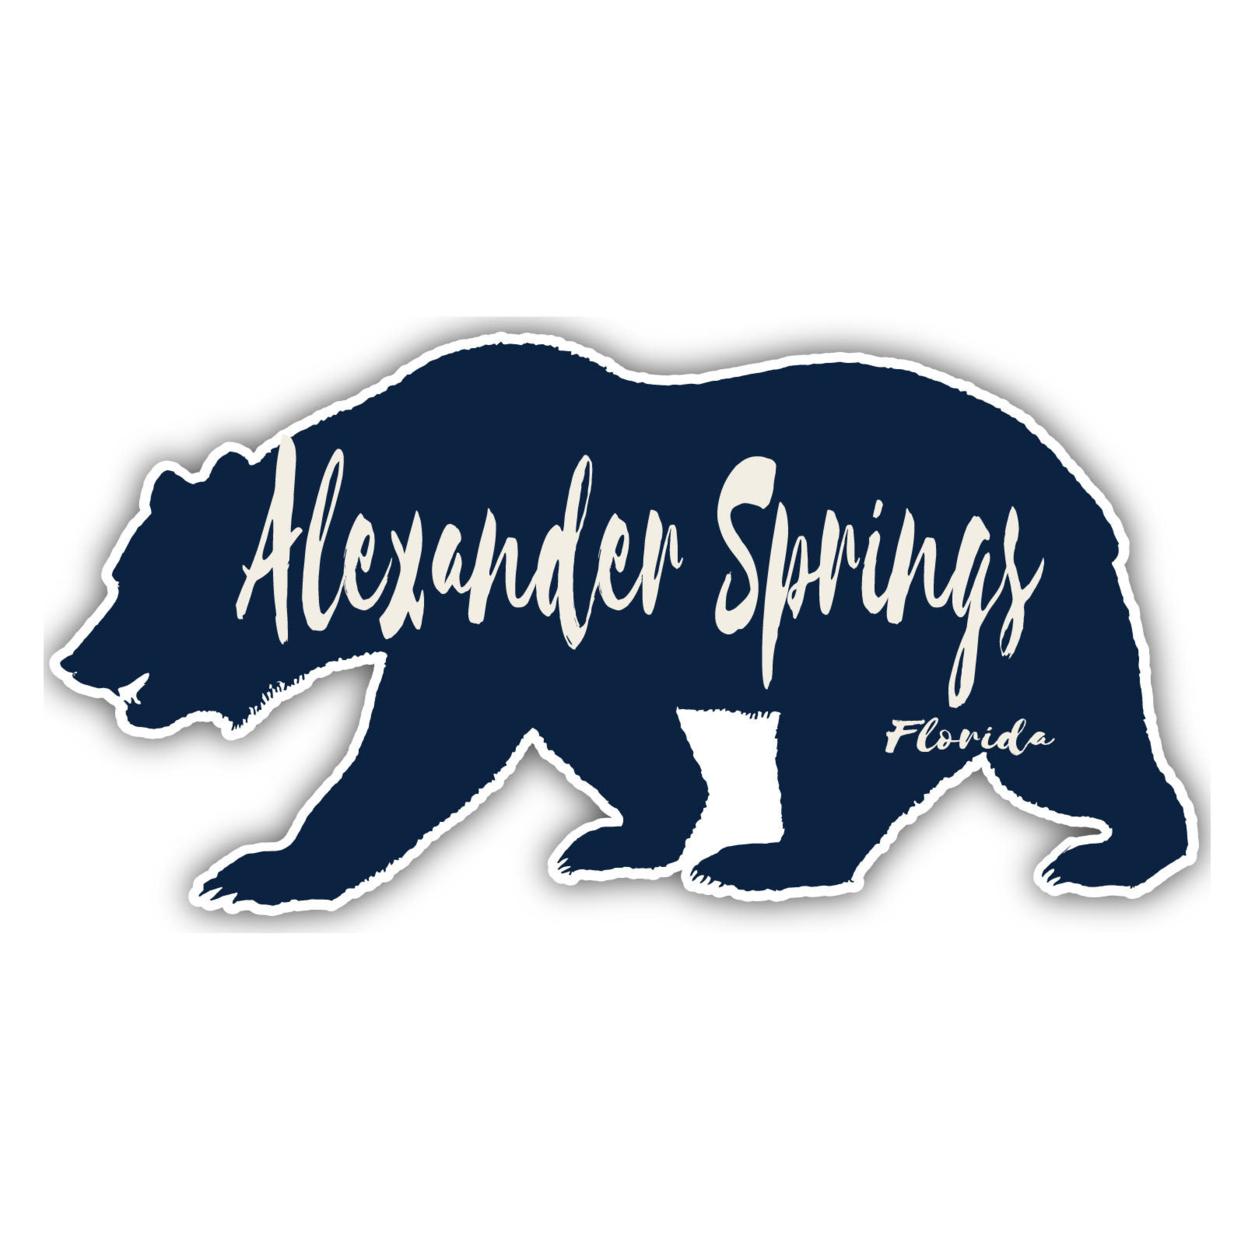 Alexander Springs Florida Souvenir Decorative Stickers (Choose Theme And Size) - 4-Pack, 10-Inch, Bear